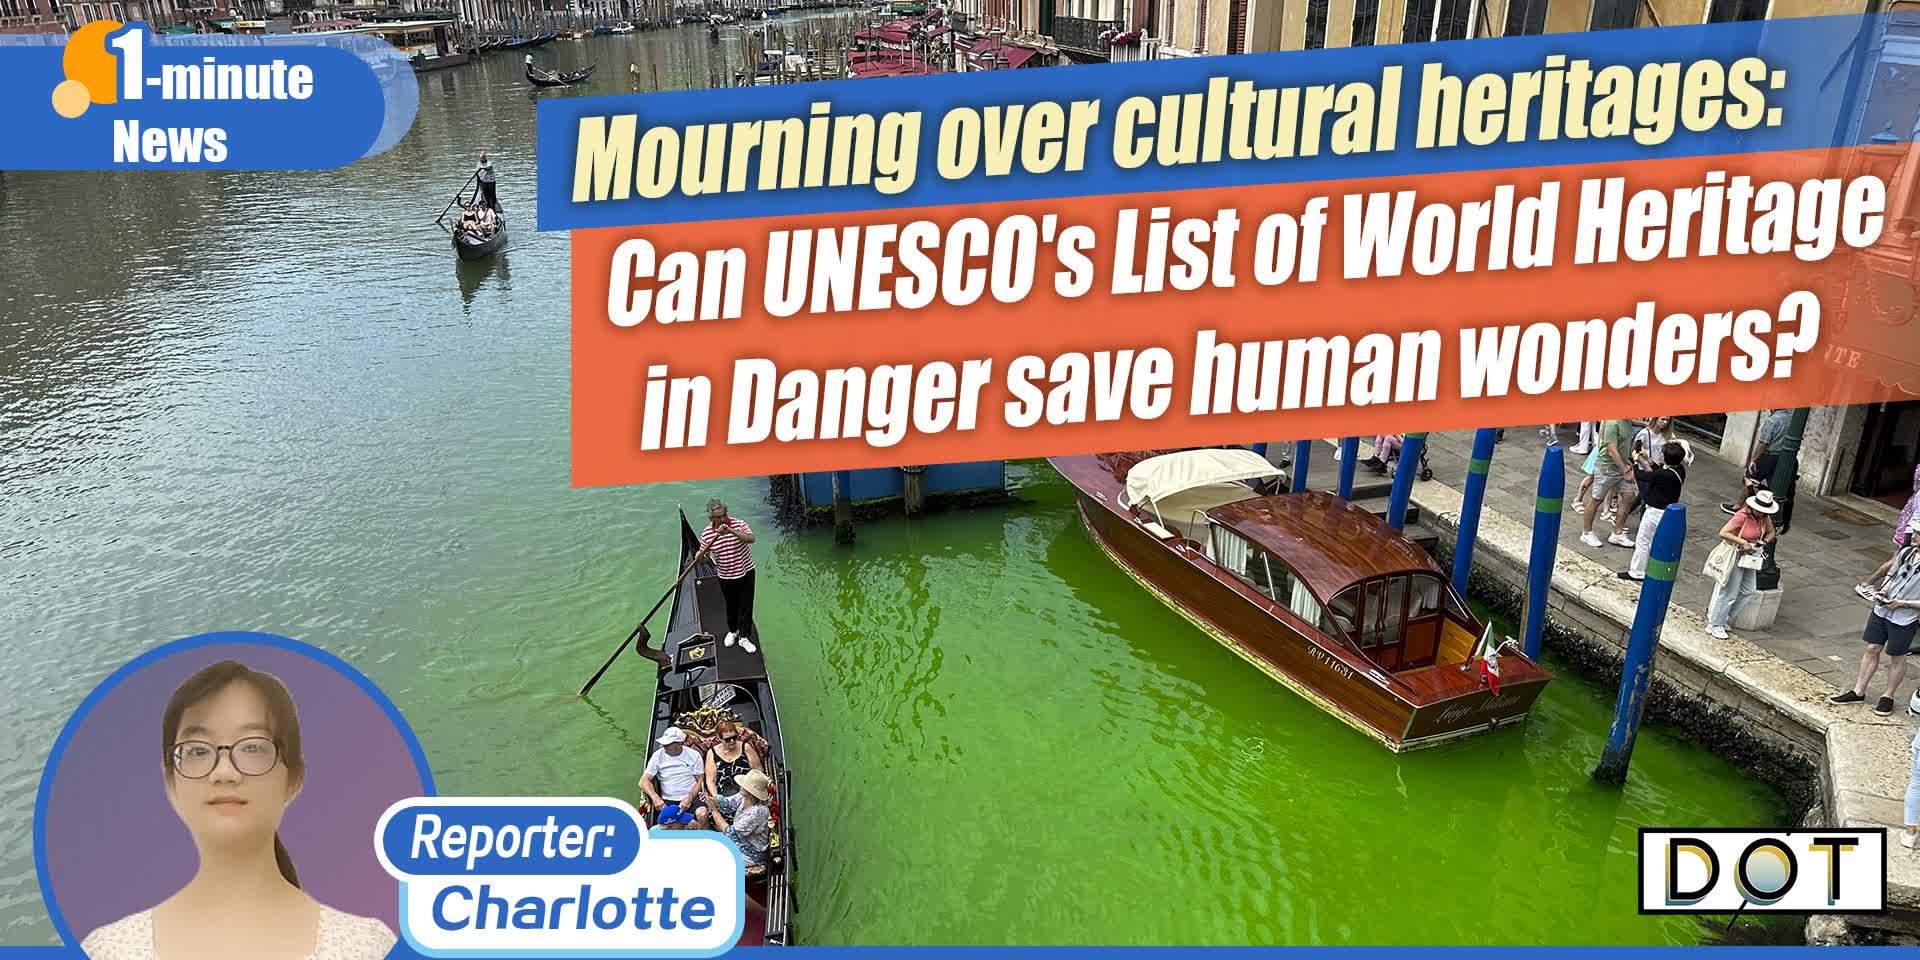 1-minute News | Mourning over cultural heritages: Can UNESCO's List of World Heritage in Danger save human wonders?